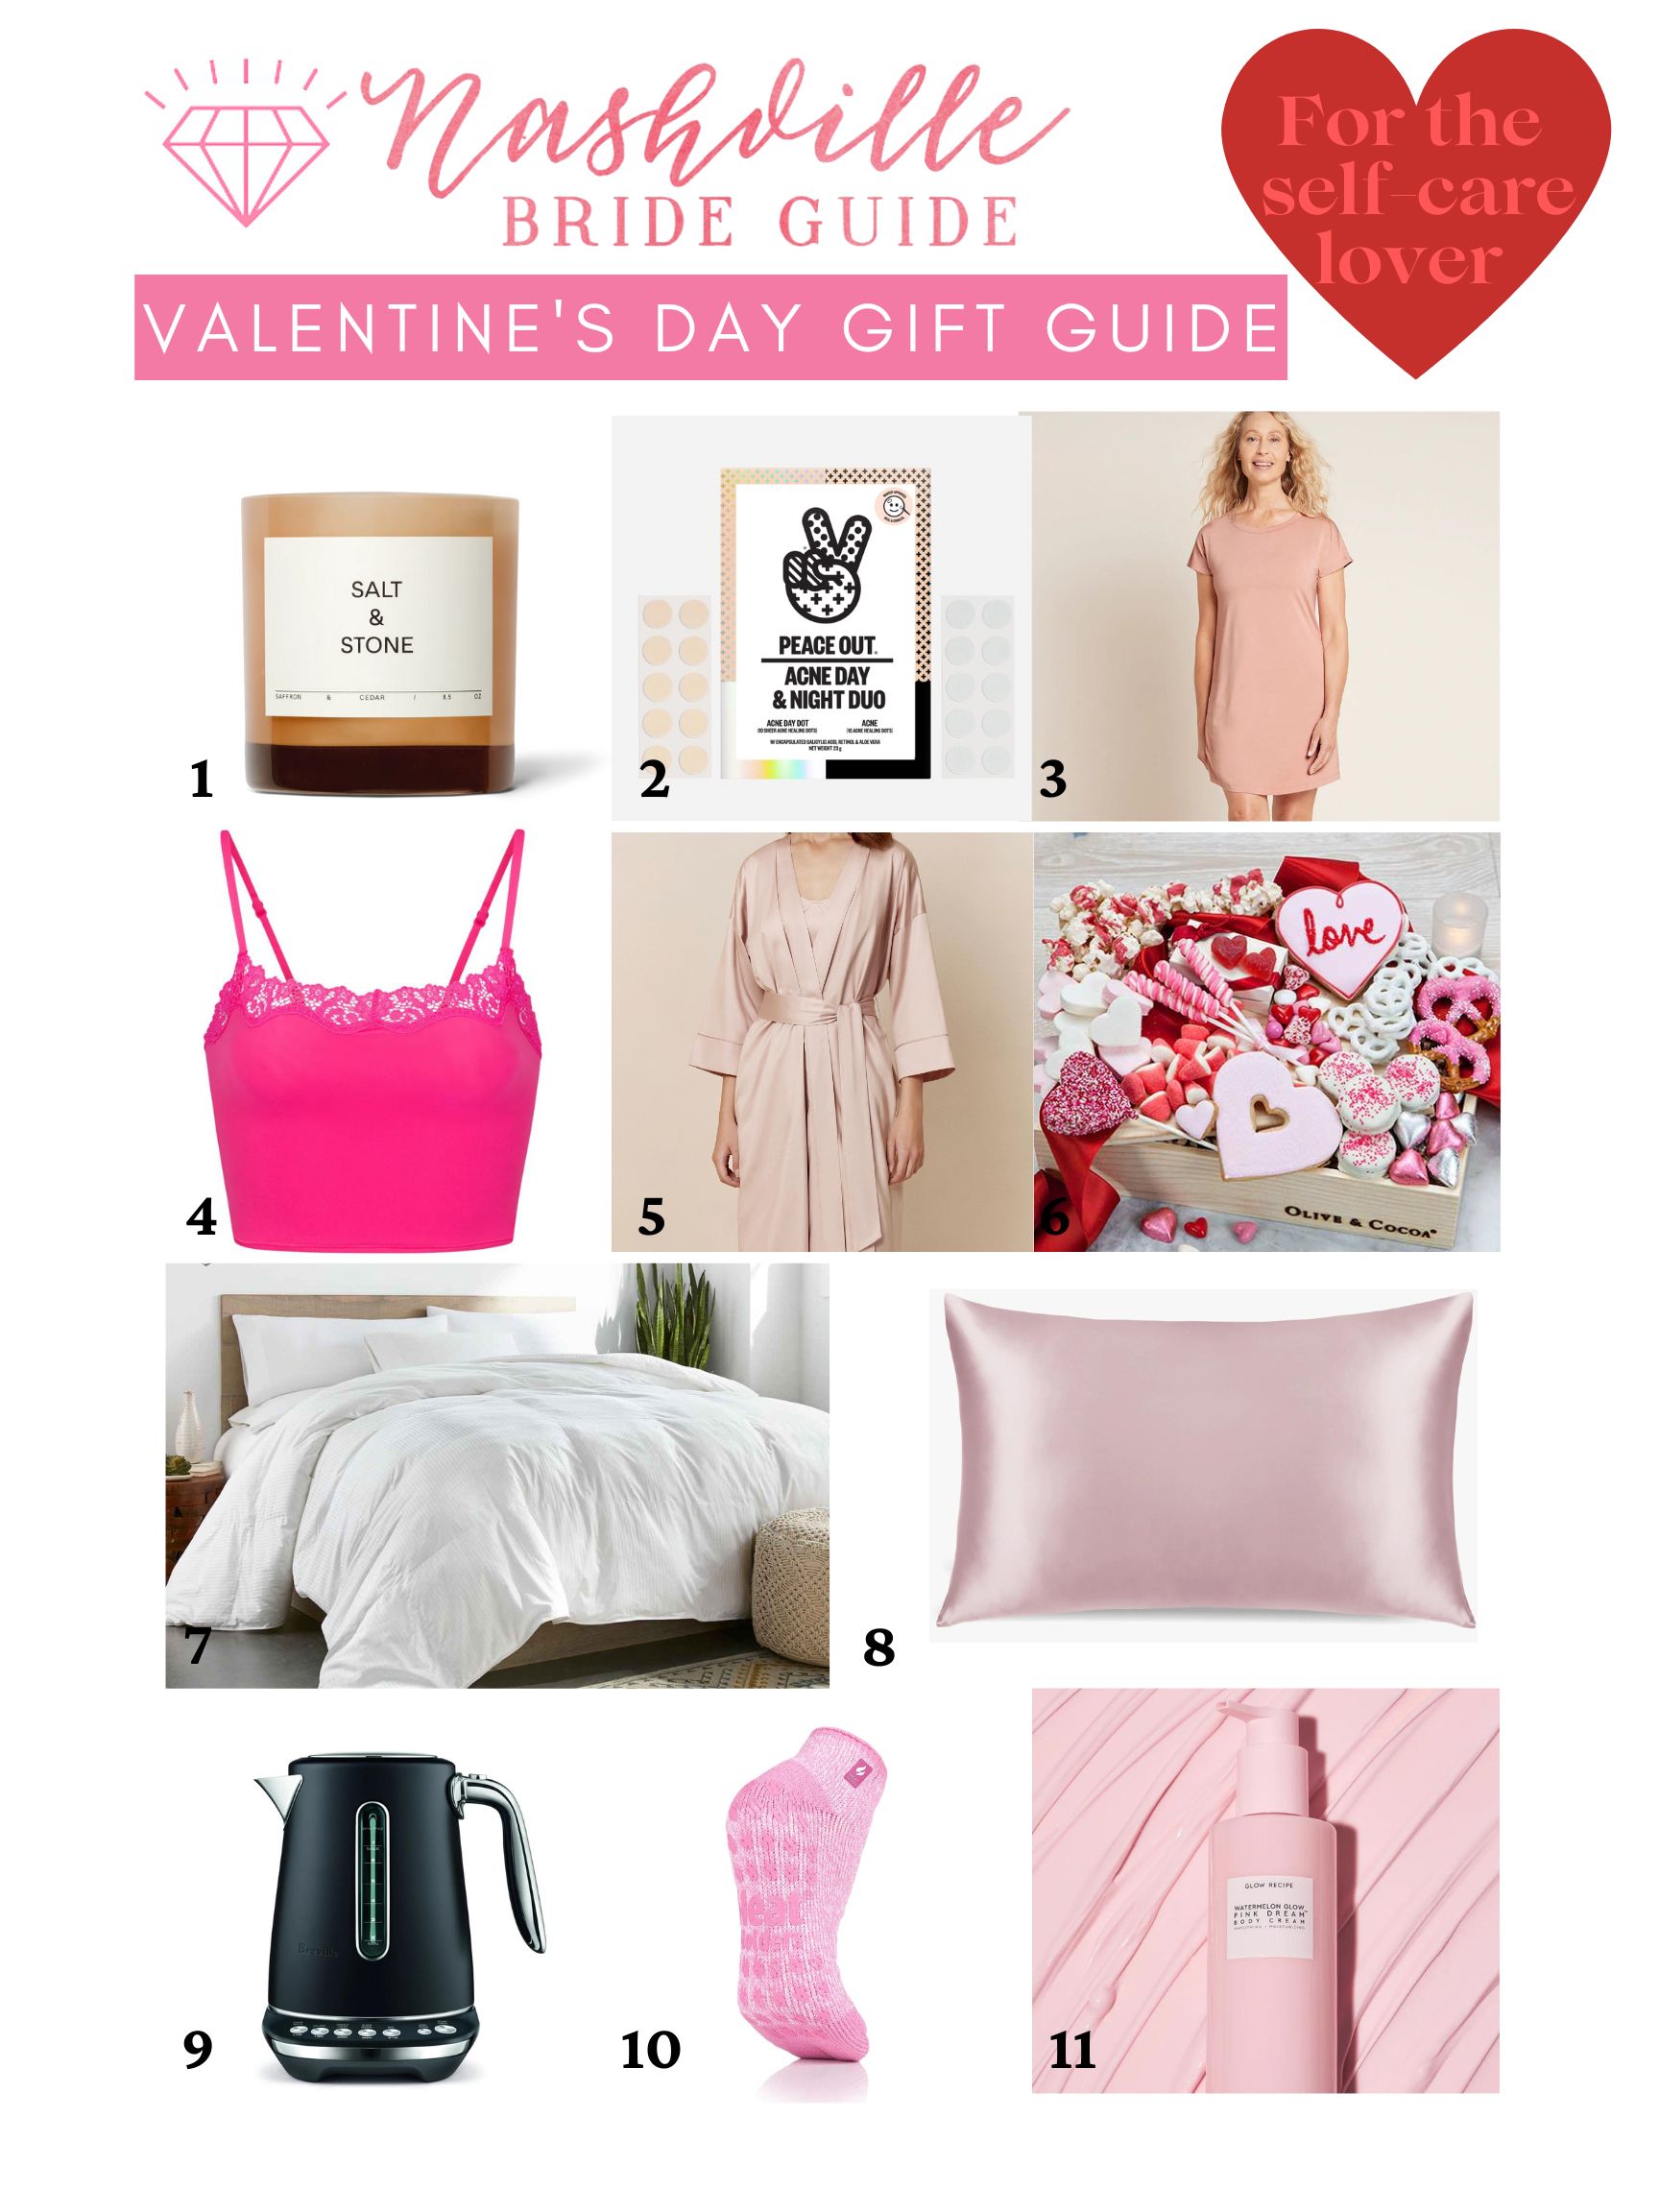 Valentine’s Day Gift Ideas for the Self-Care Lover